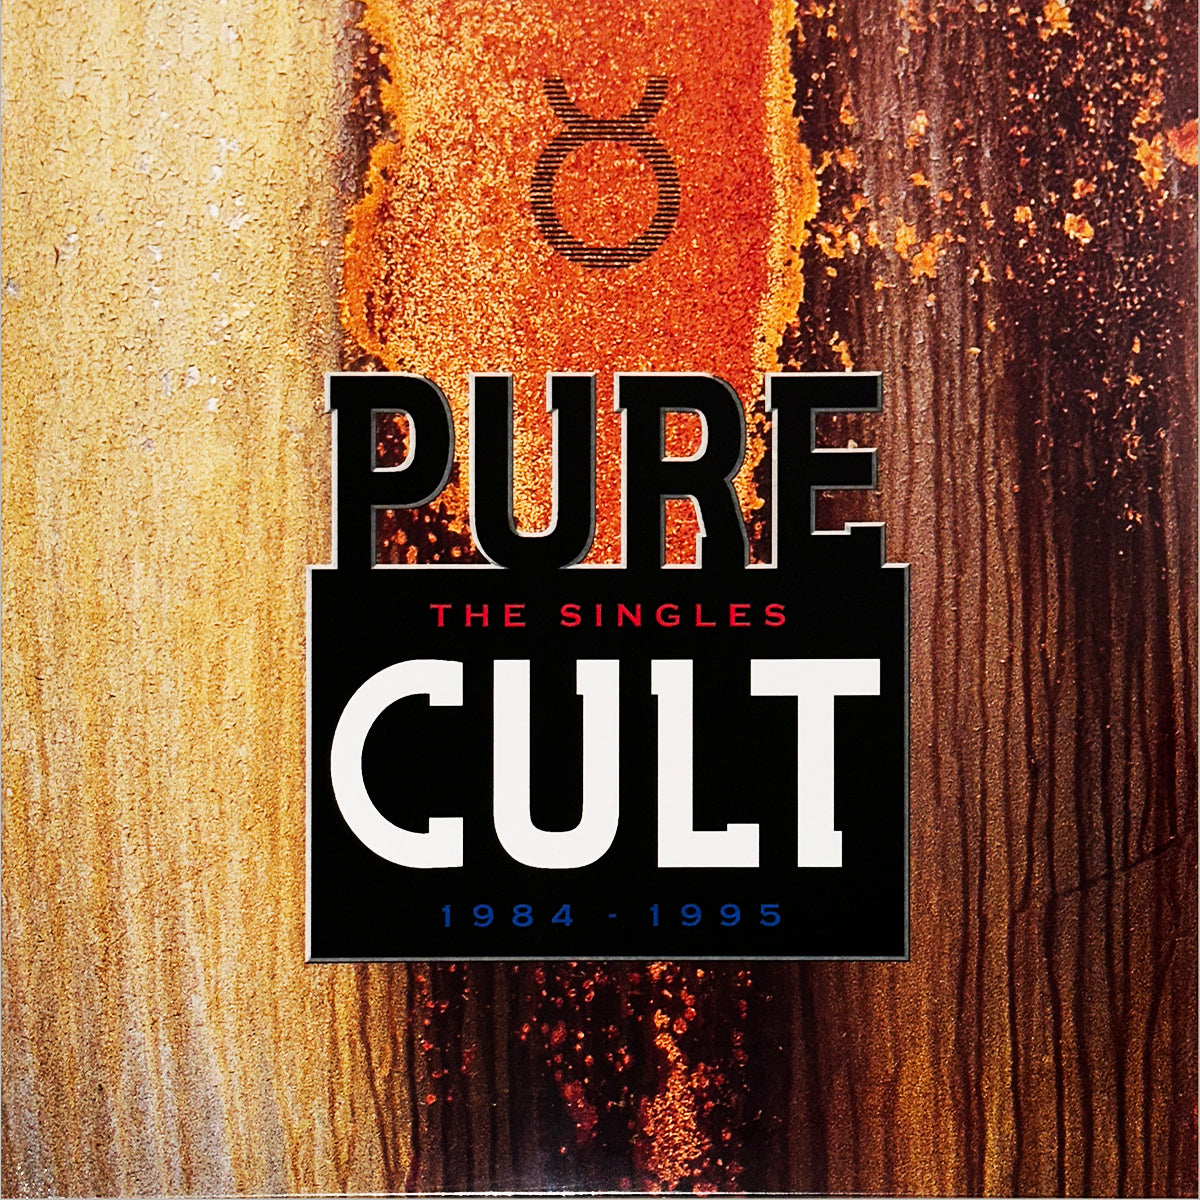 Pure Cult The Singles 1984 - 1995